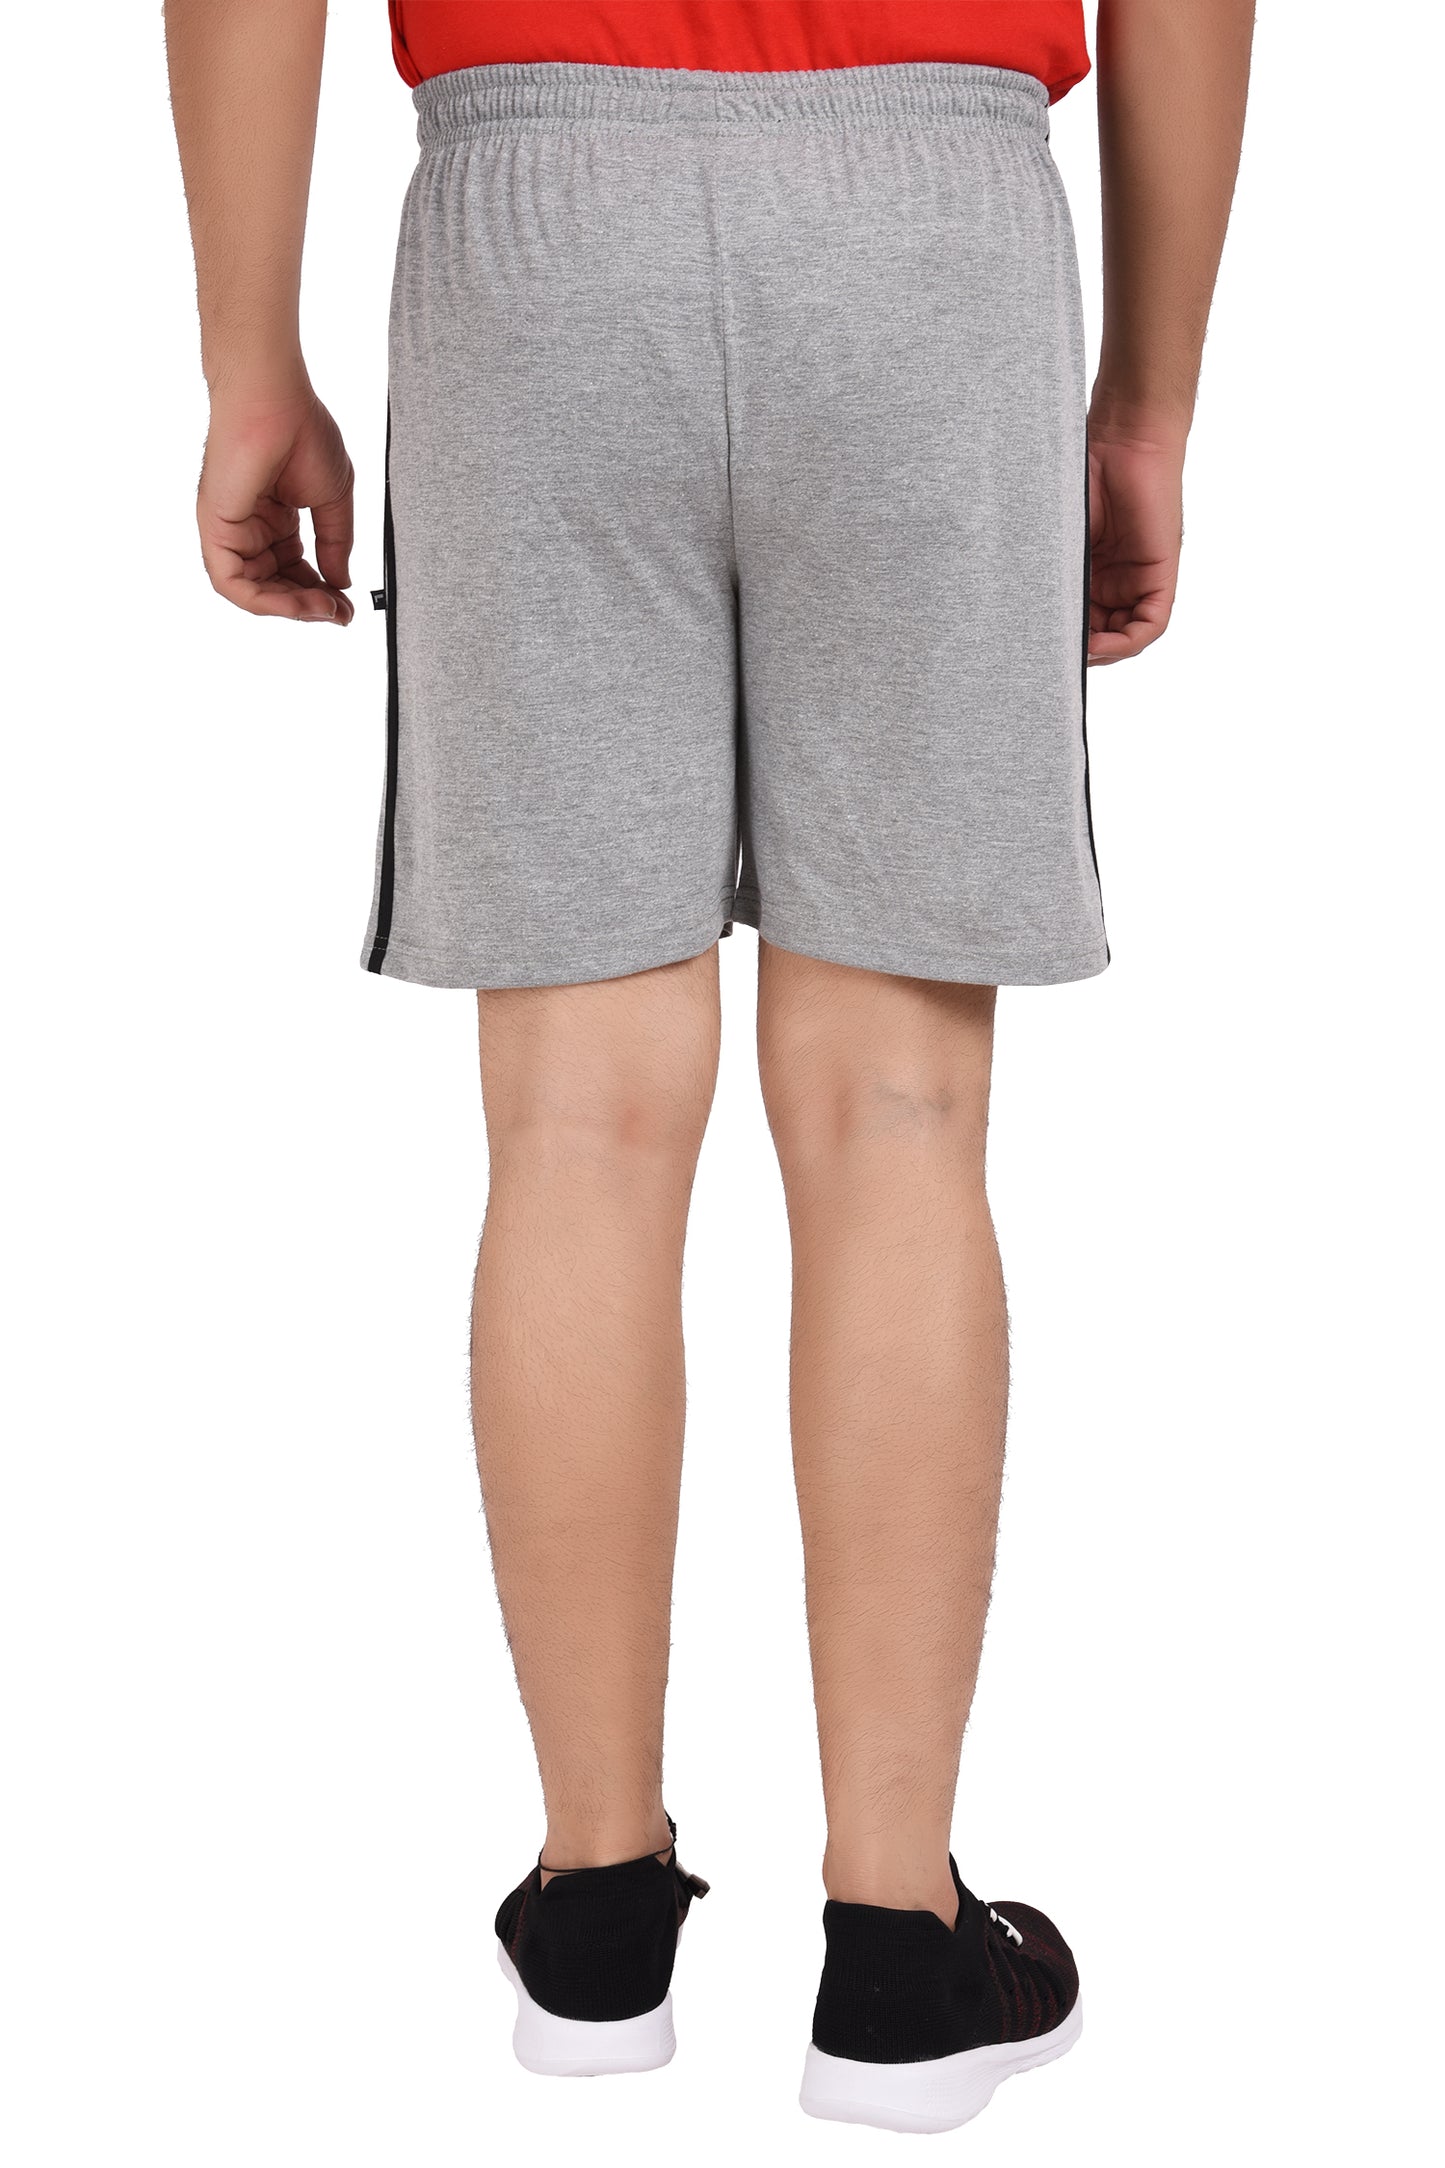 NEO GARMENTS Men’s Cotton Stripped Chain Pockets Long Shorts. | GREY | SIZES FROM M TO 7XL.